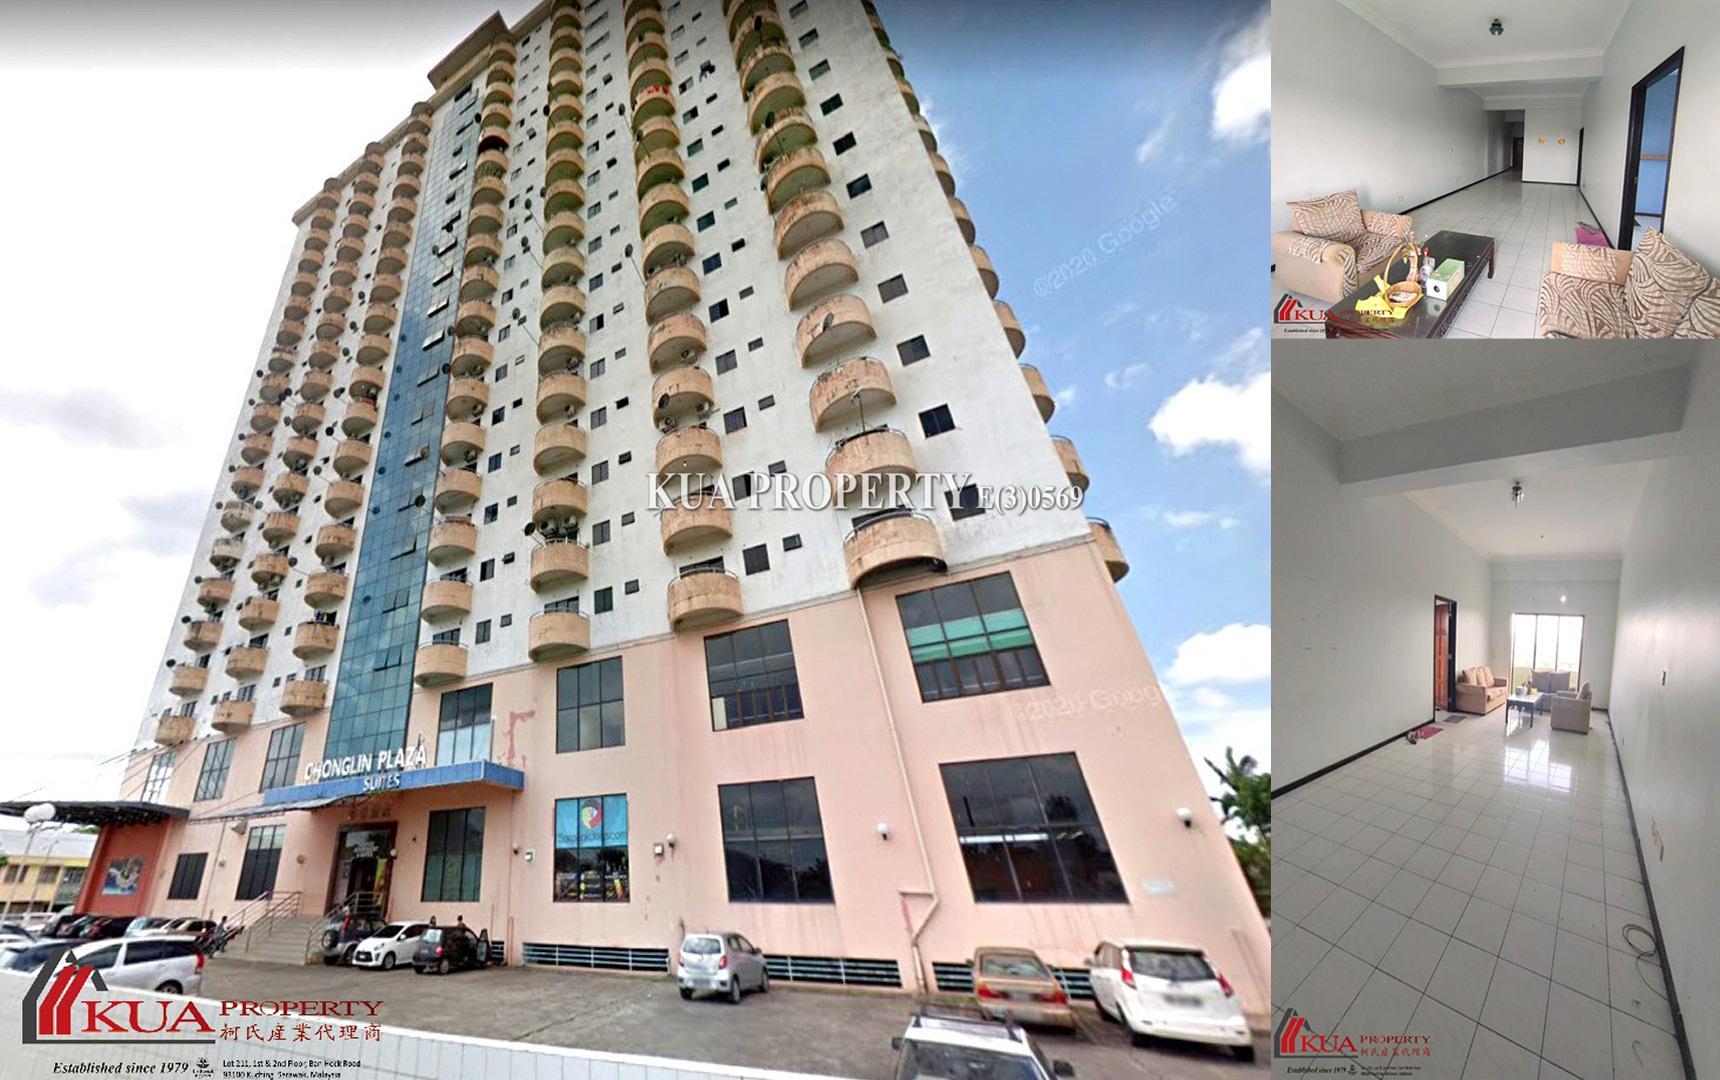 Chonglin Plaza Apartment For Sale! at Green Road, nearby SGH Kuching